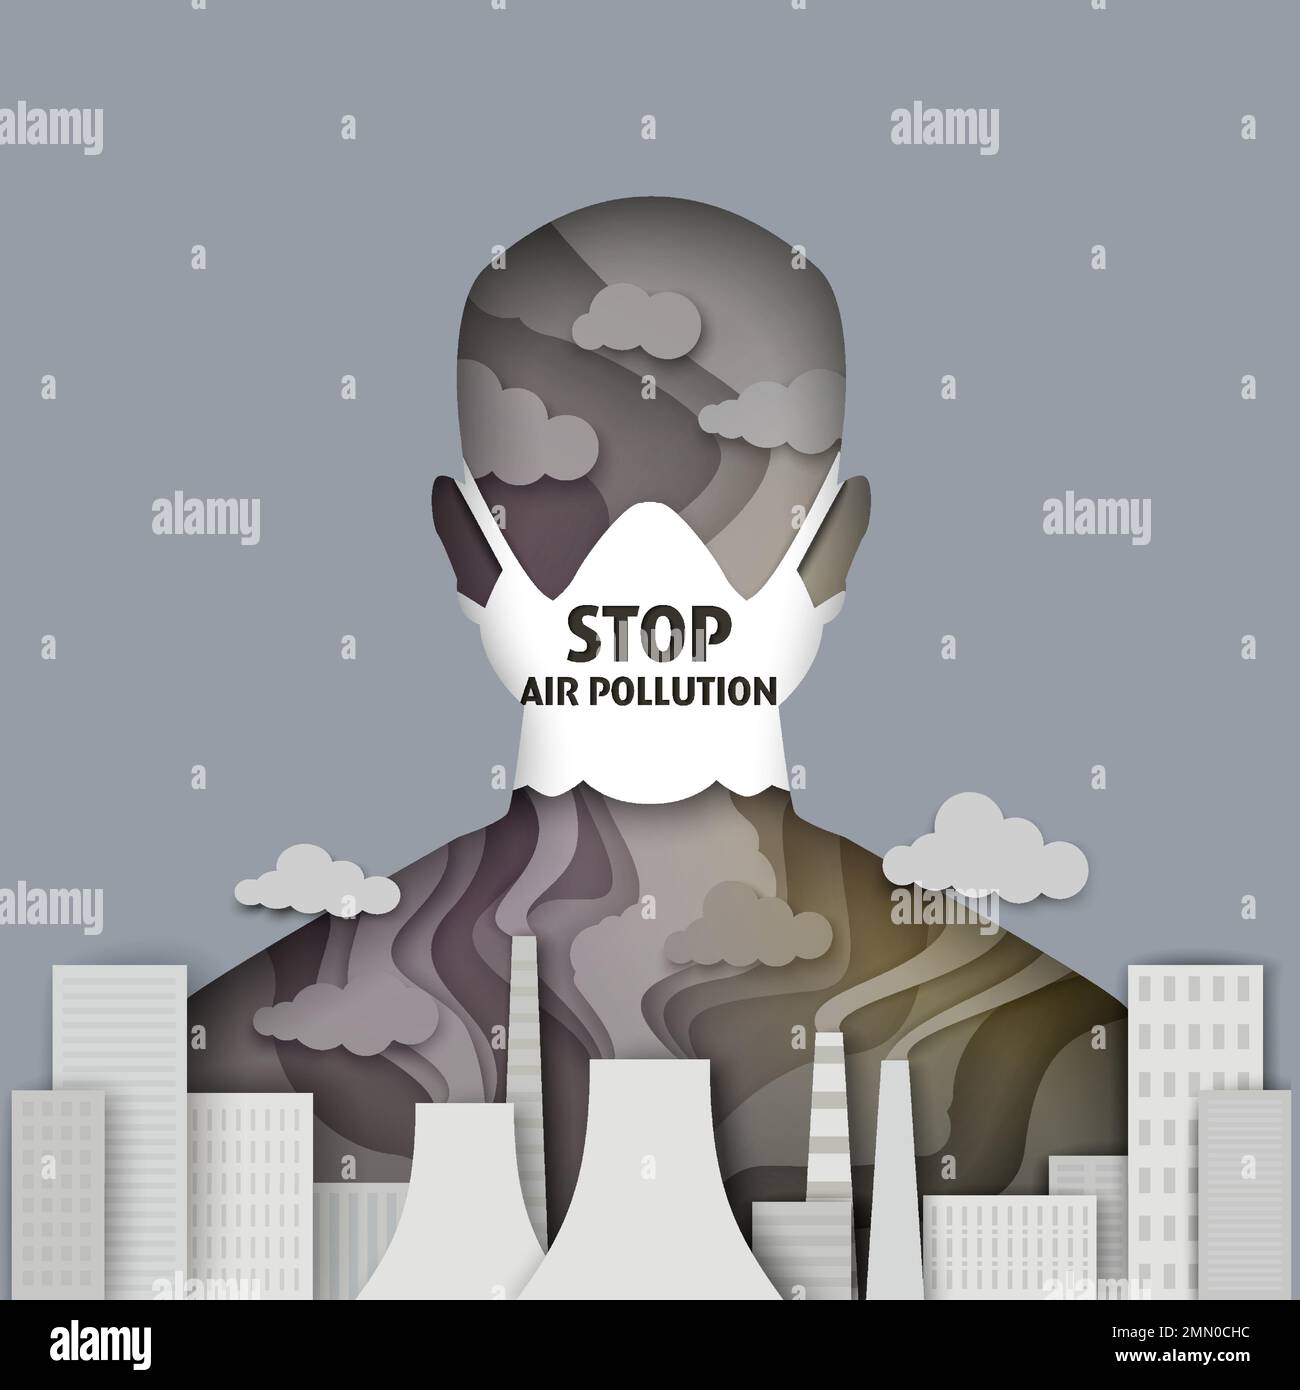 Stop air pollution, vector illustration in paper art style Stock Vector